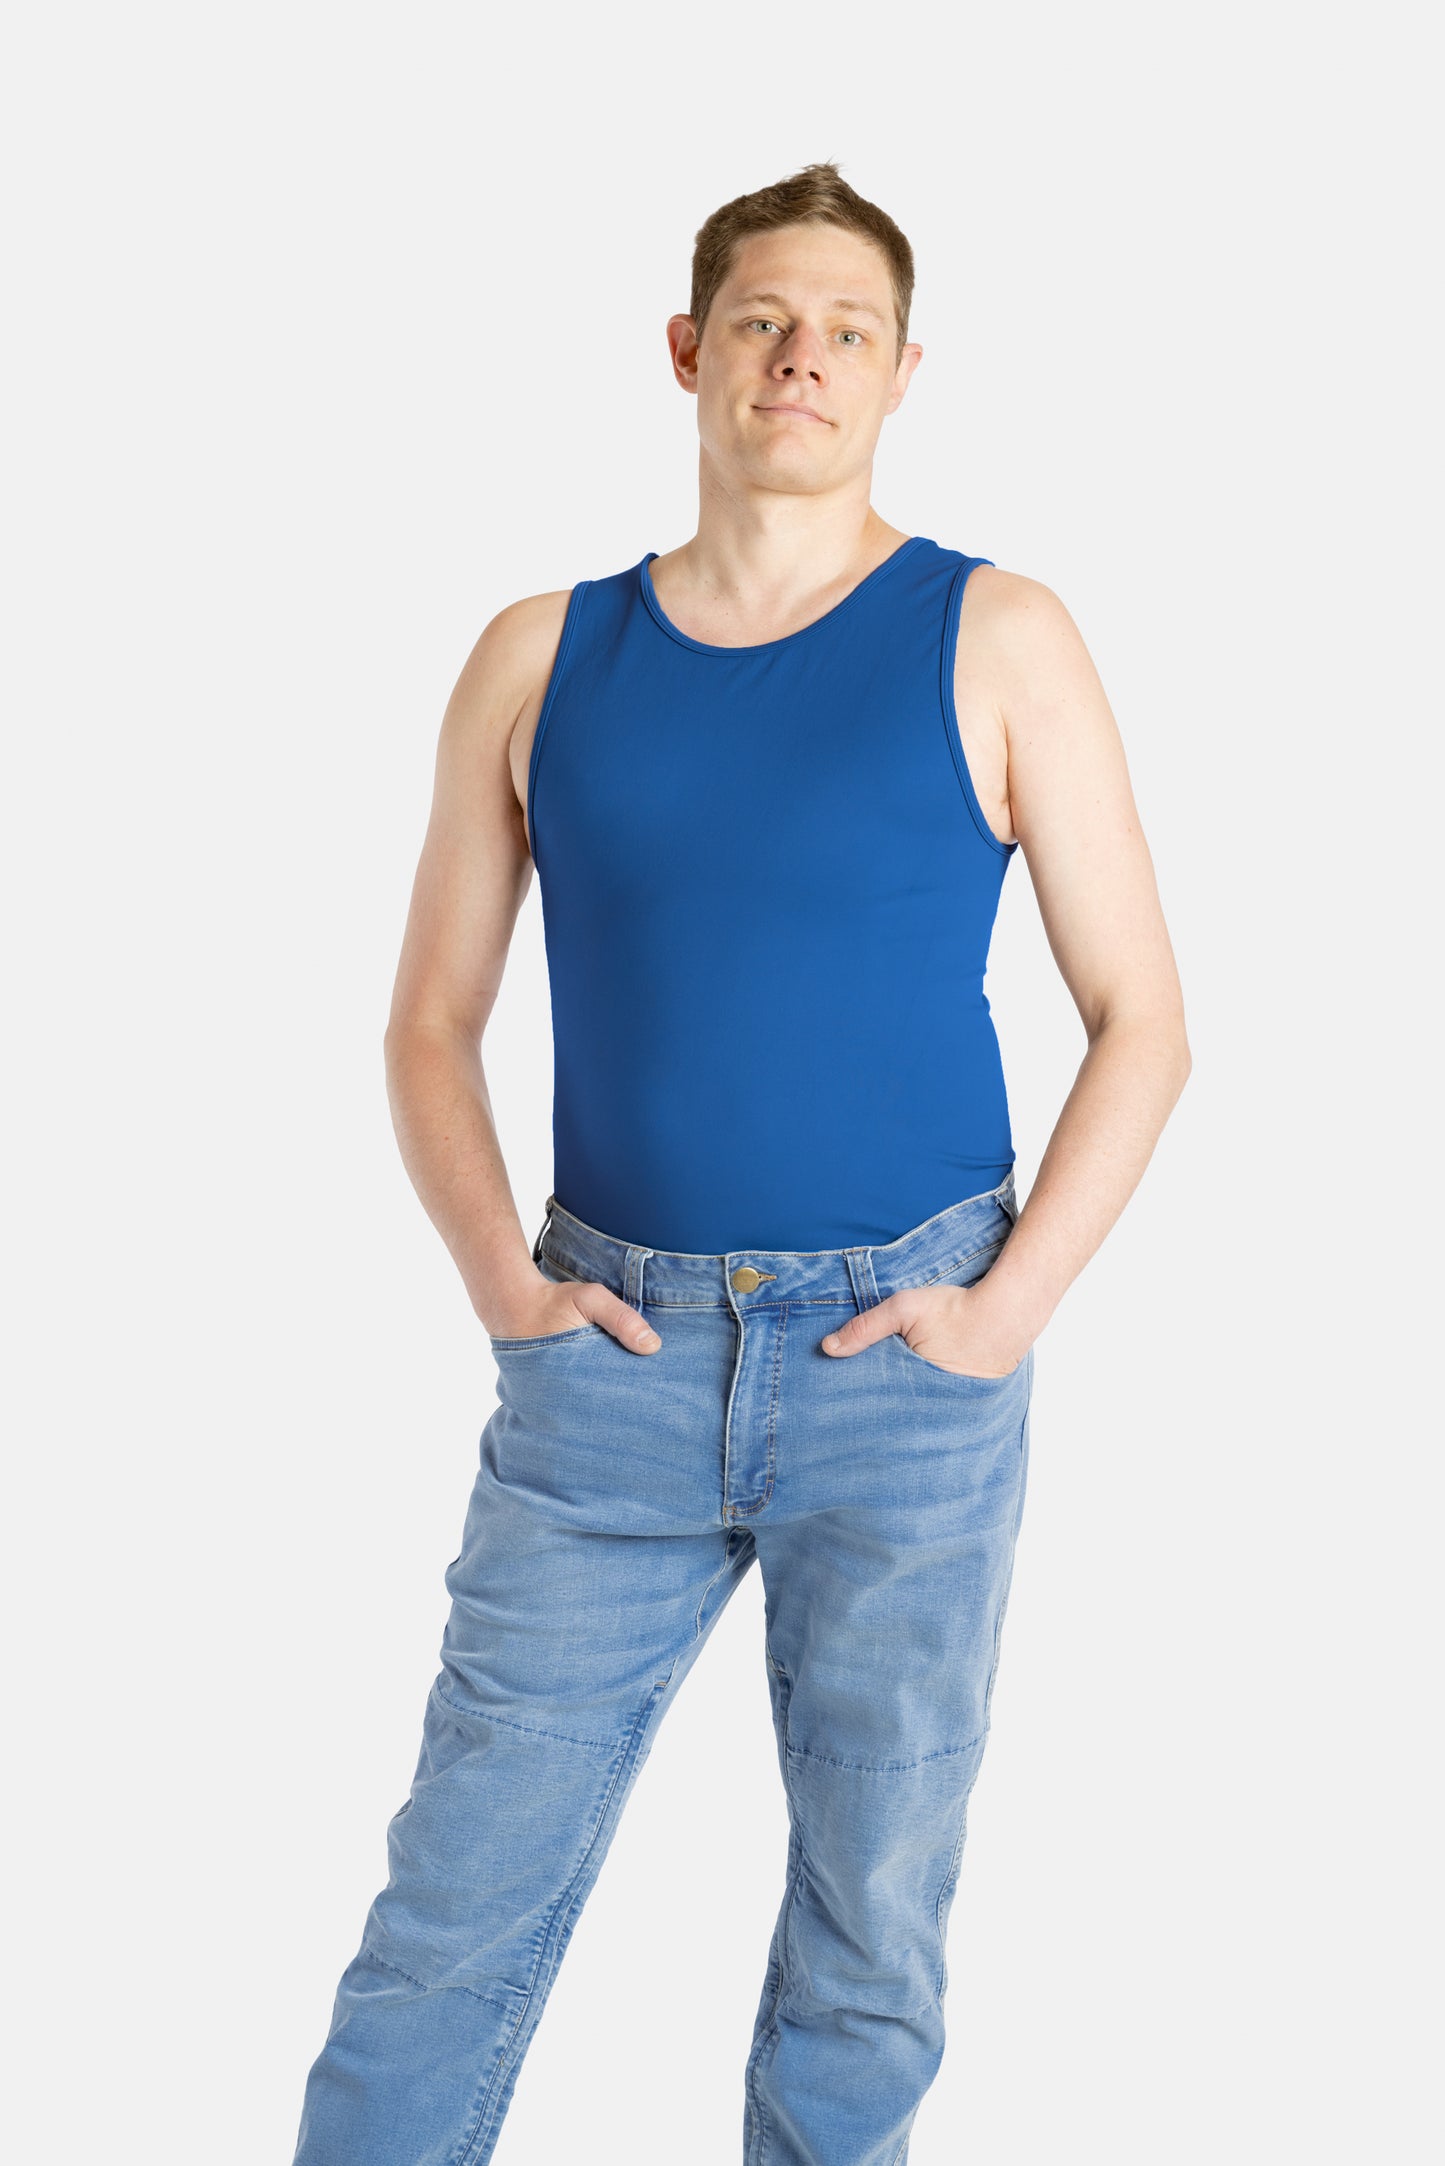 A white man with short brown hair wears a navy tank top and denim jeans.